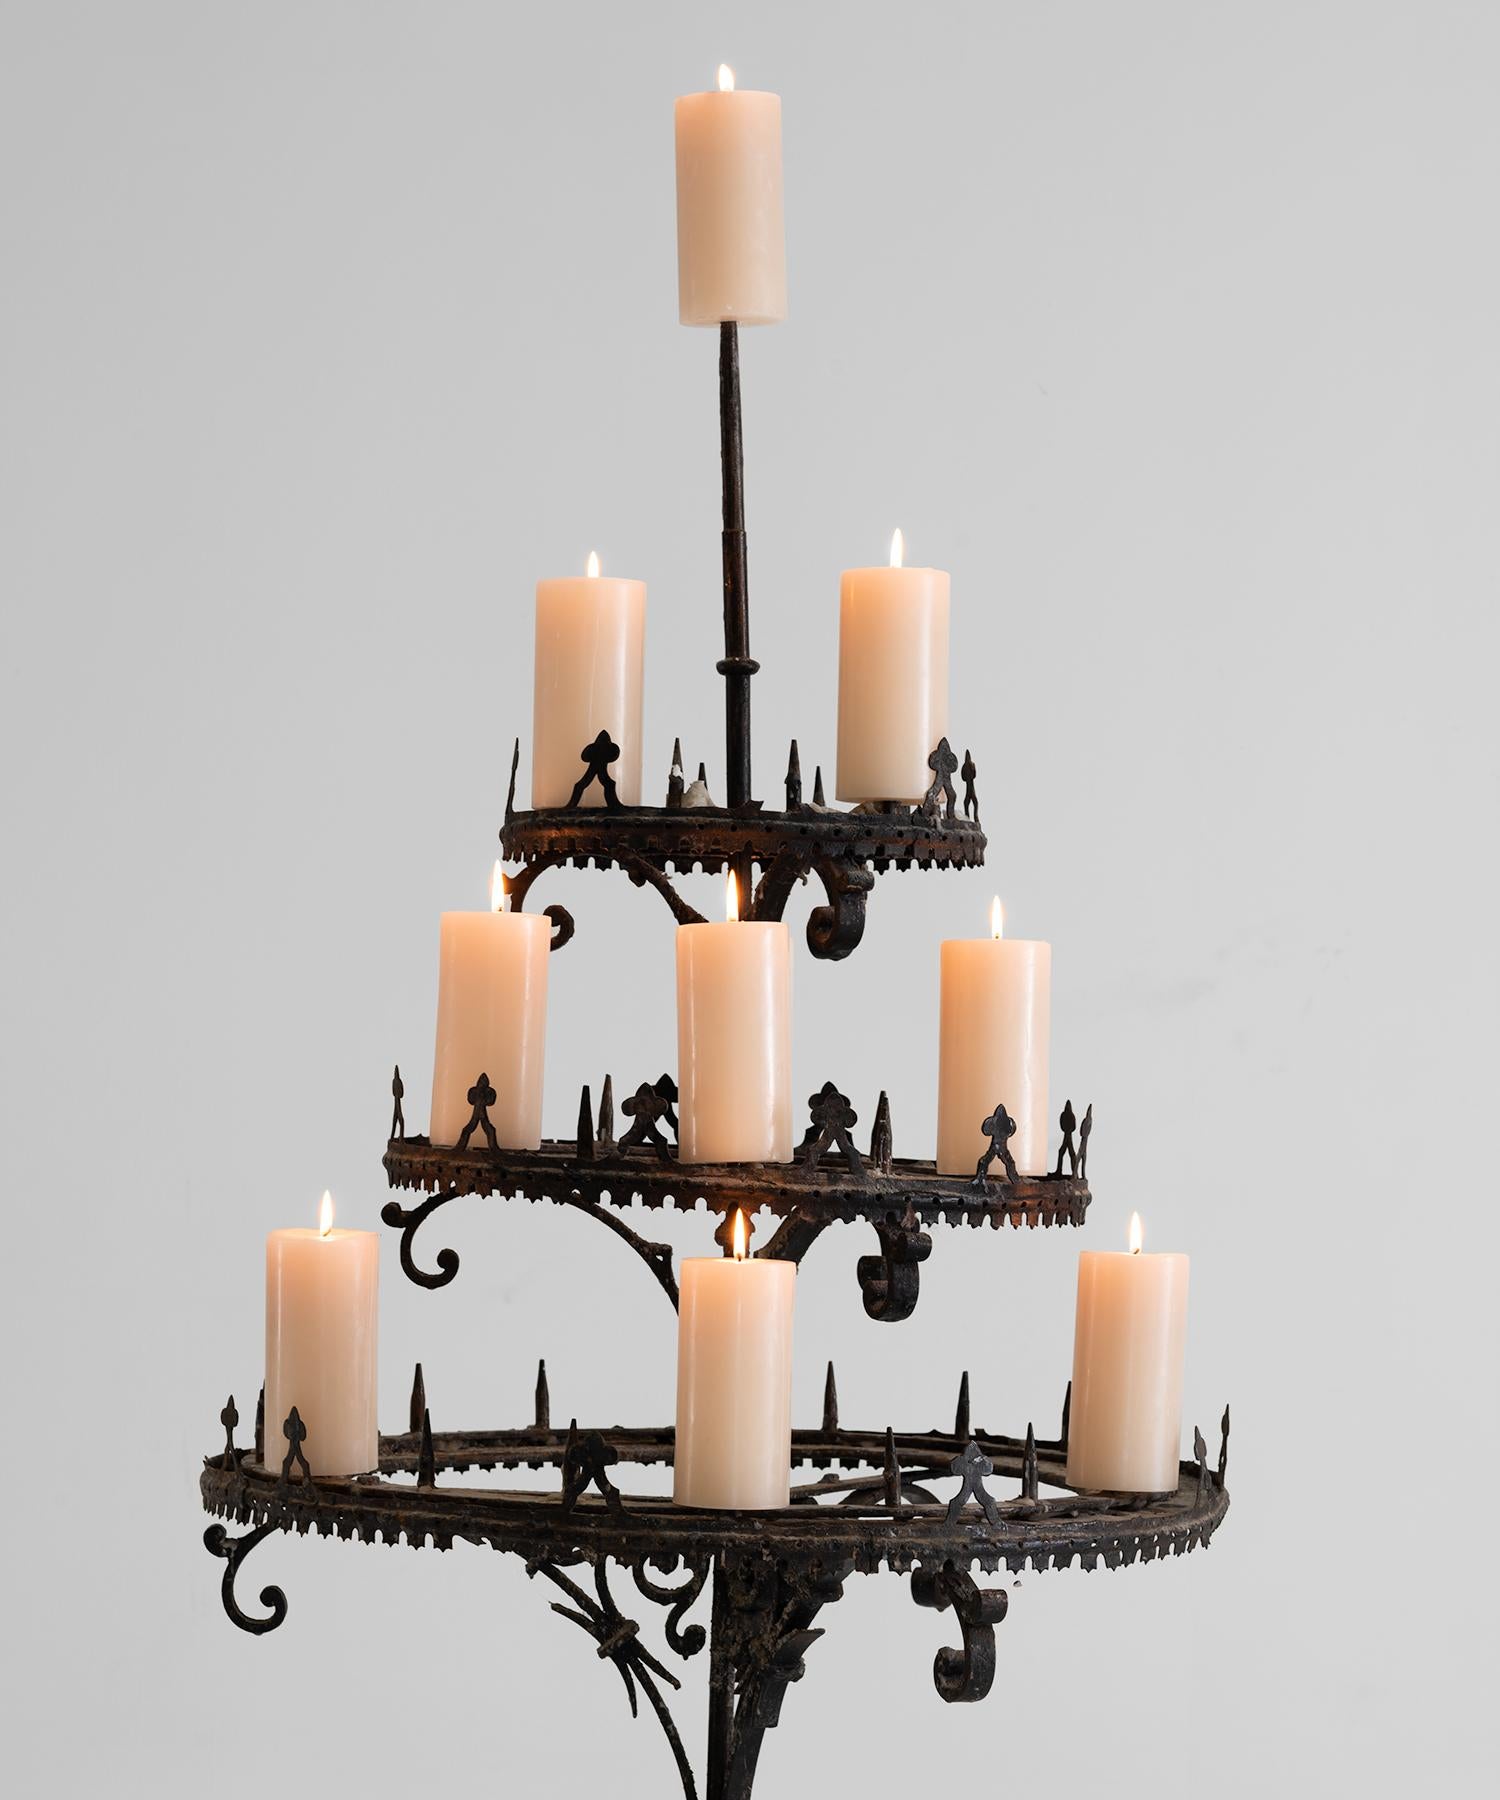 Decorative iron candelabra with ornate details.